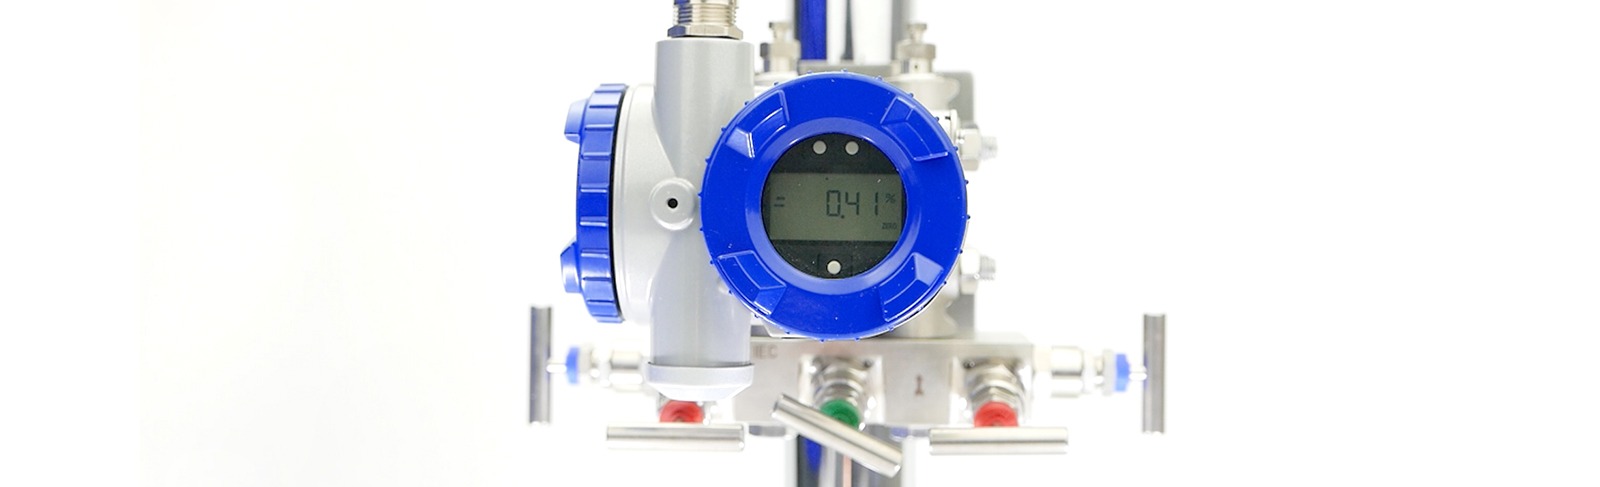 5-valves manifold with differential pressure transmitter